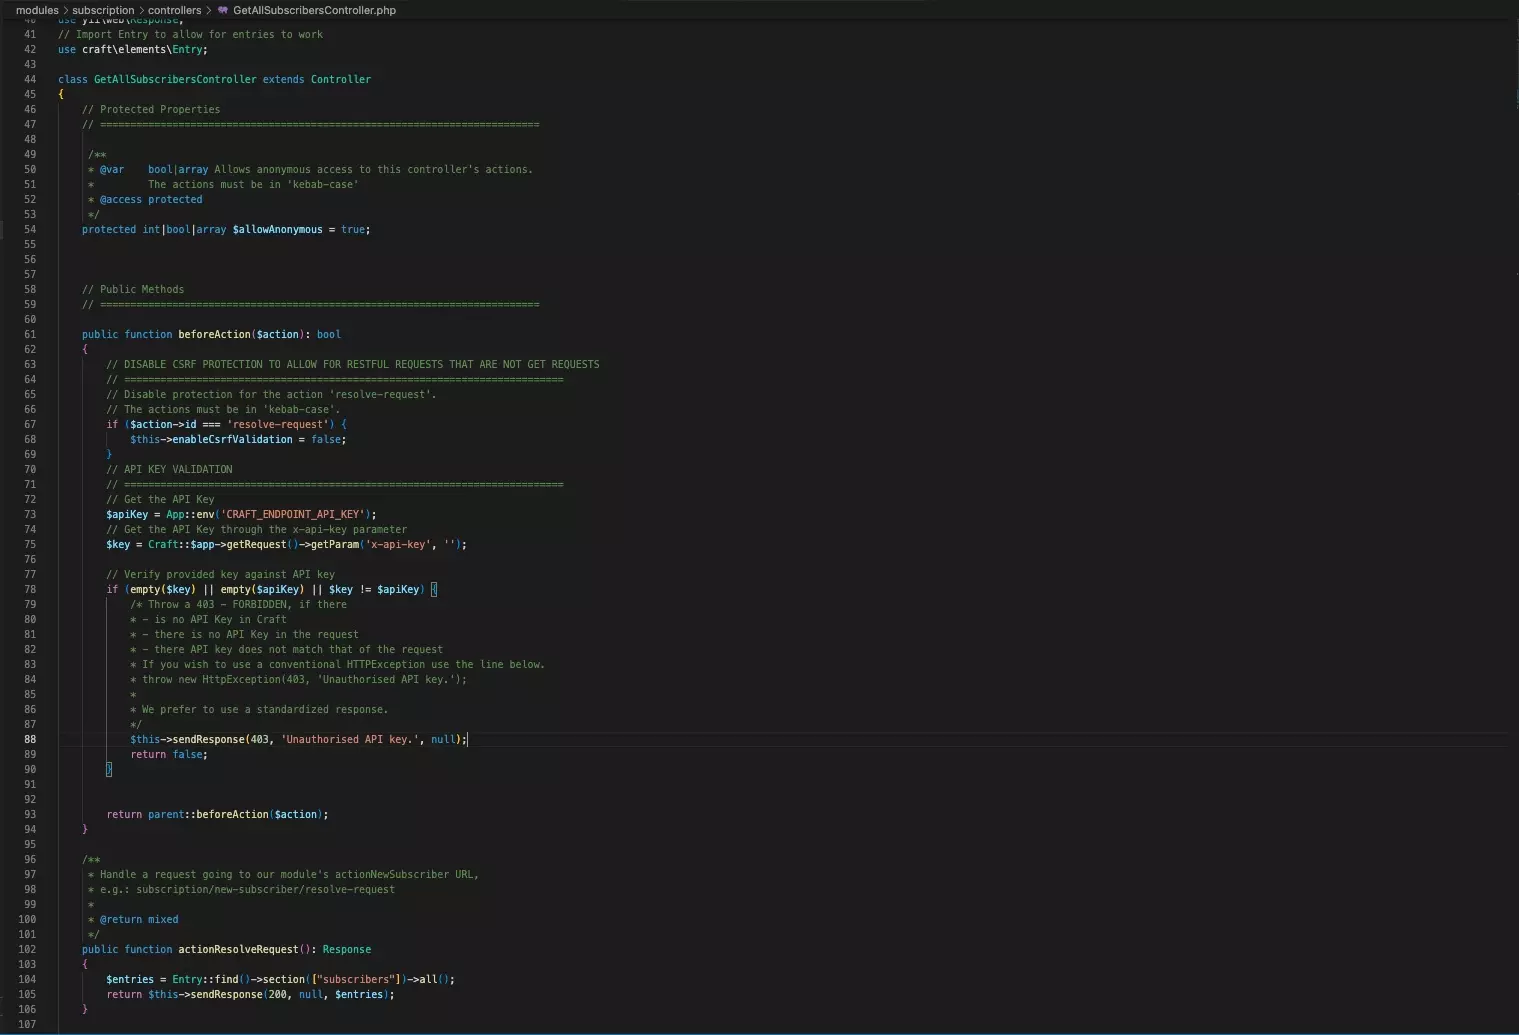 A screenshot of VSCode of the completed API. The sample code is provided below.